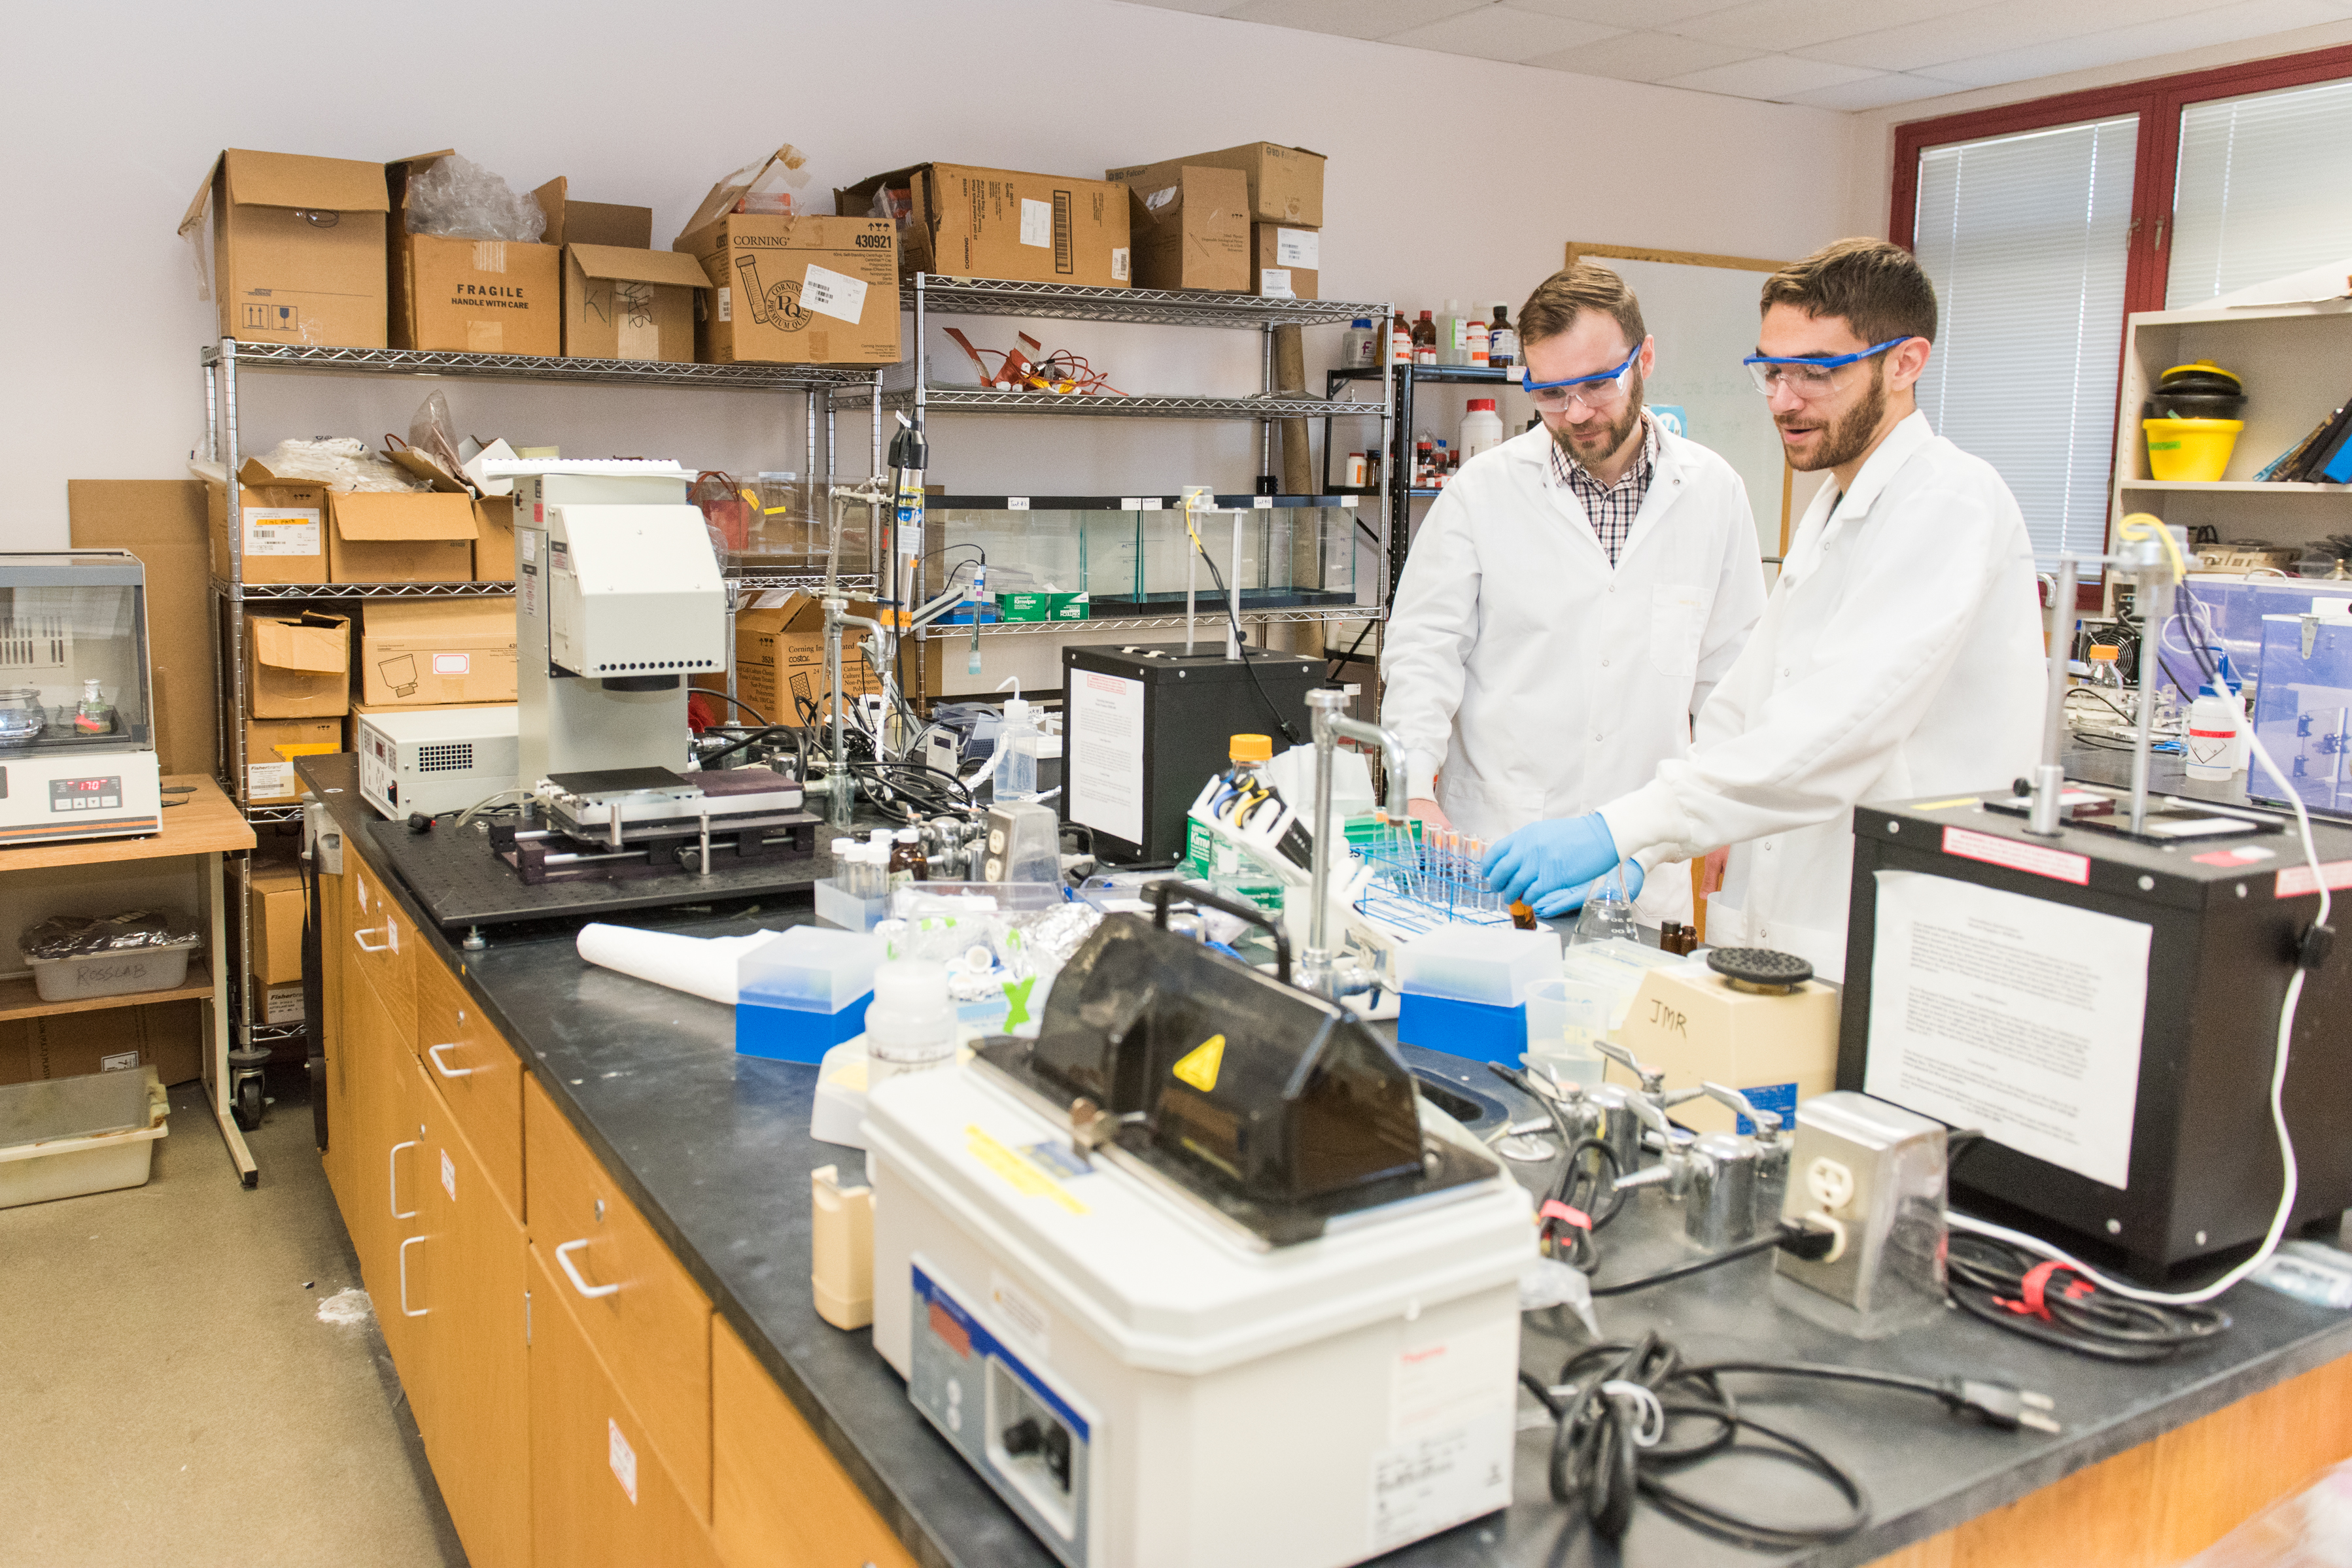 Lee Blaney, and Daniel Ocasio '17, chemical engineering, working in the lab.